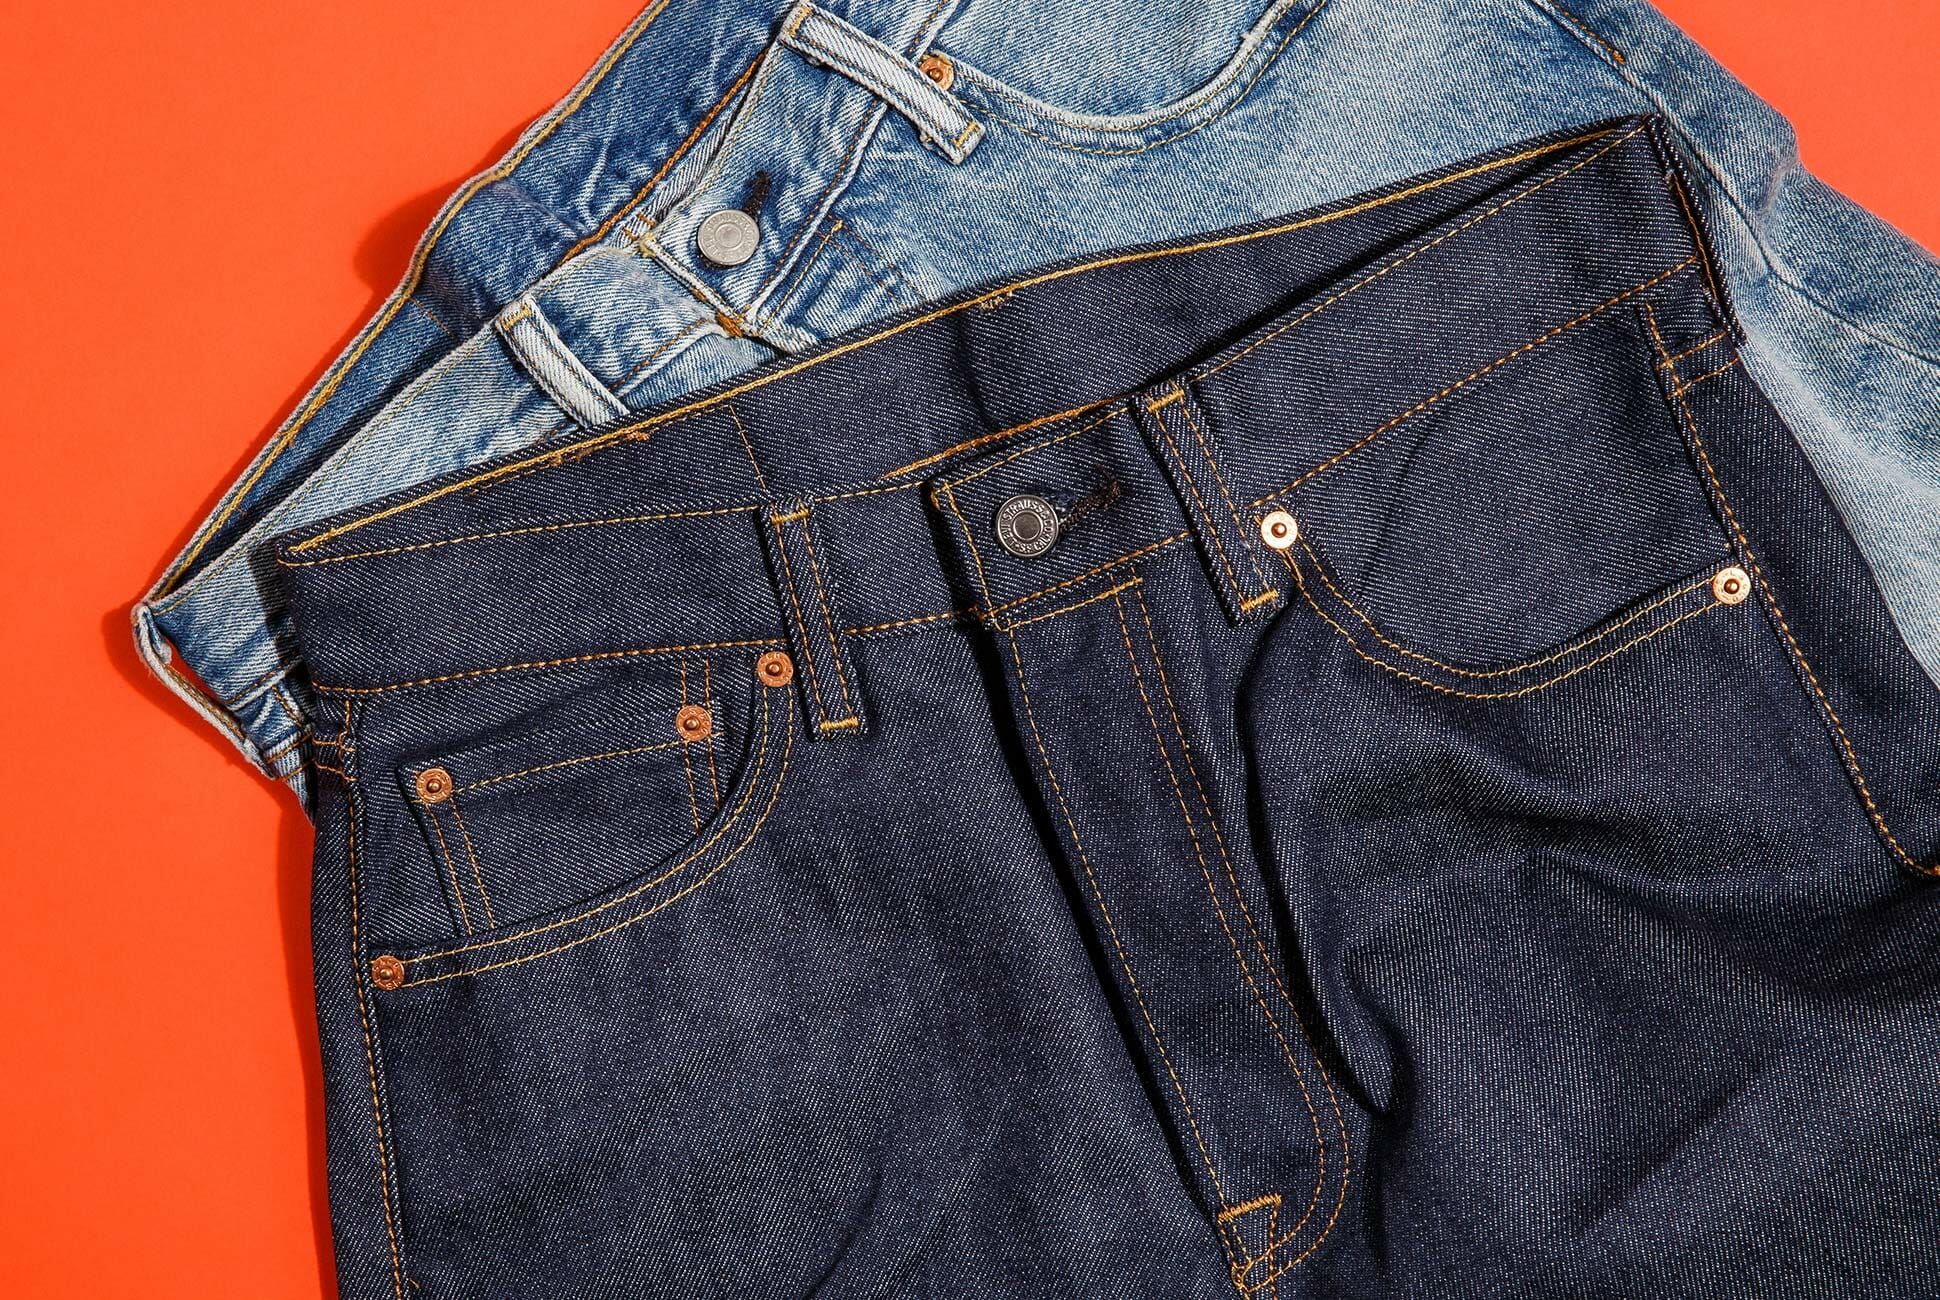 Levi's New 501 Jeans Look Like They Time-Traveled Here from 1963